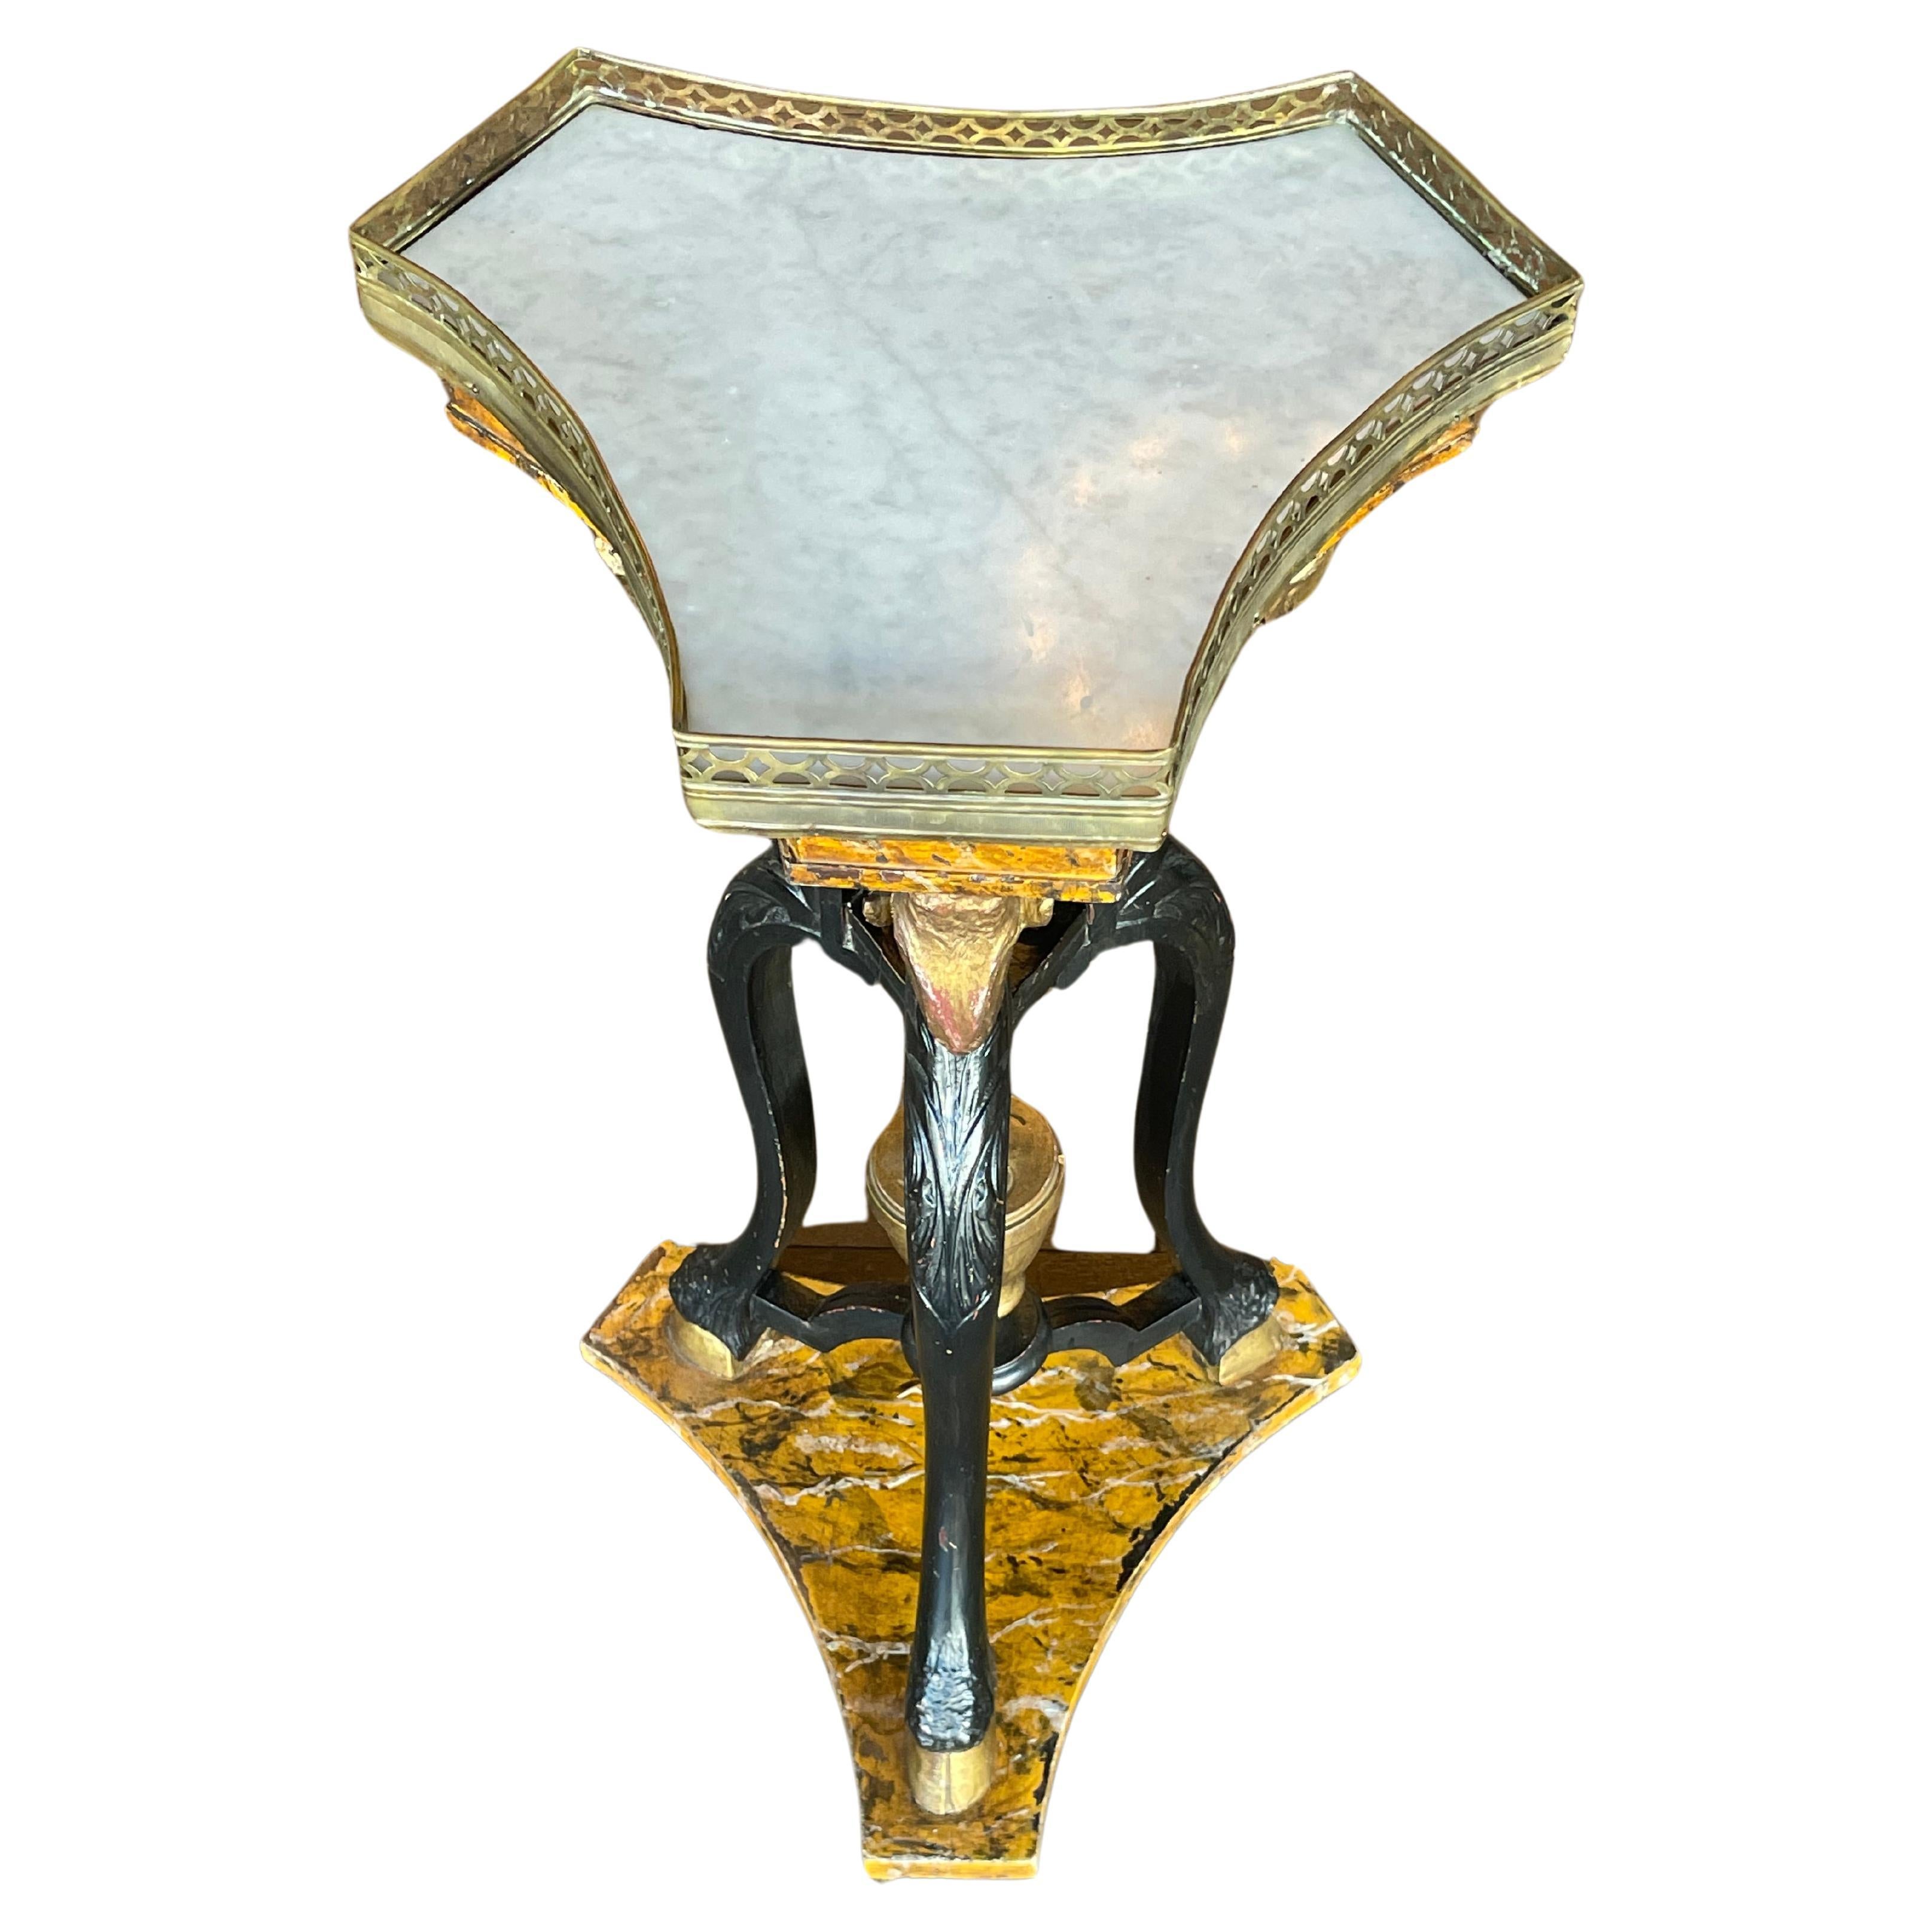 Italian Neoclassical Brass mounted parcel occasional table circa 1950
Gilt ebonite base 
Tripartite faux marble top 


